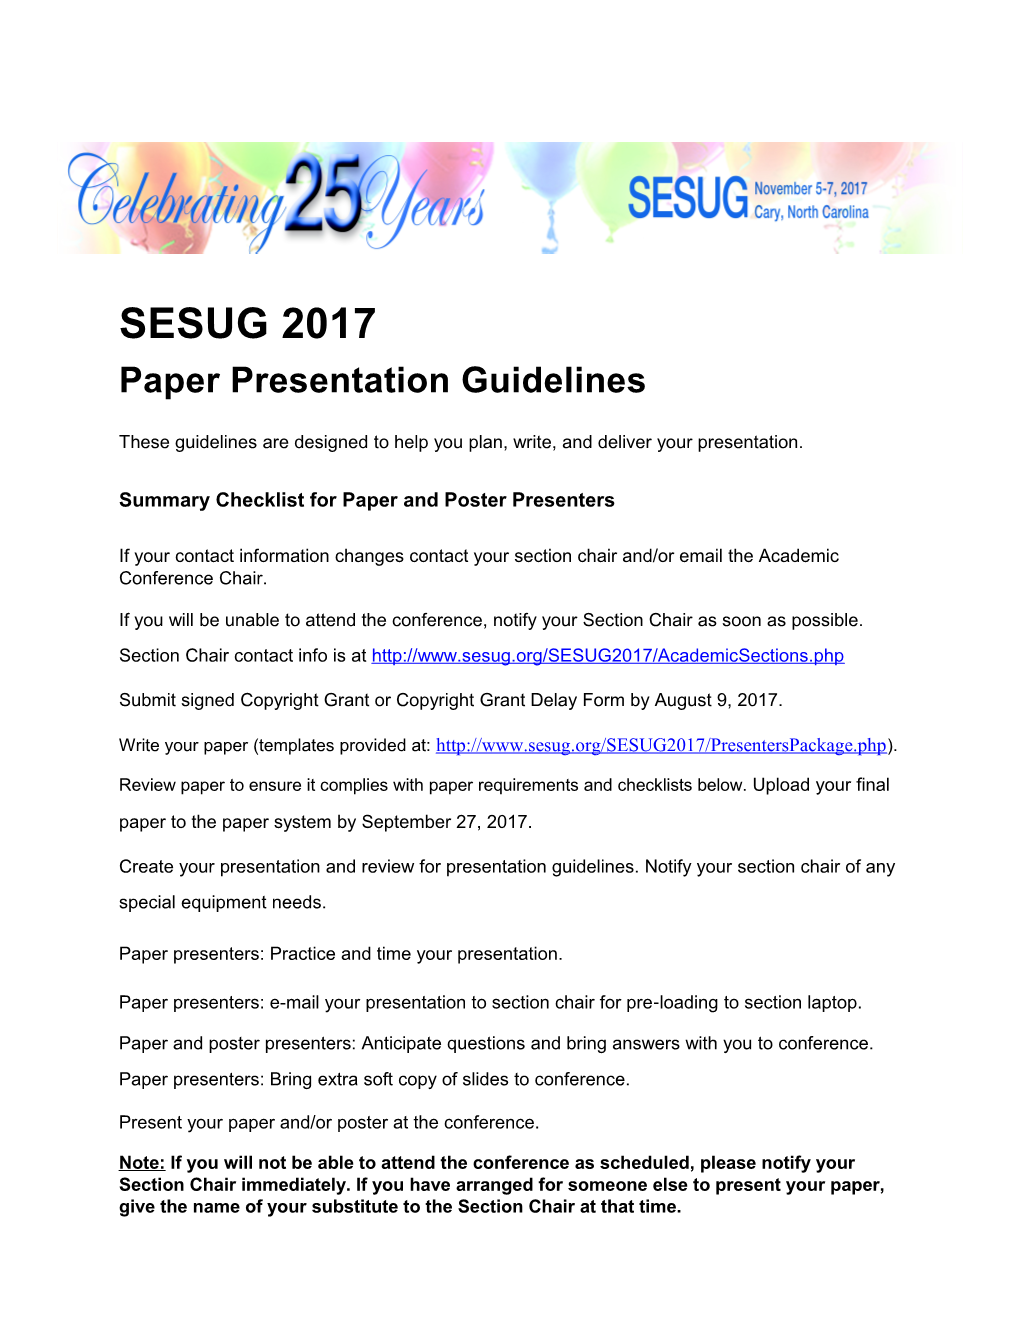 Summary Checklist for Paper and Poster Presenters